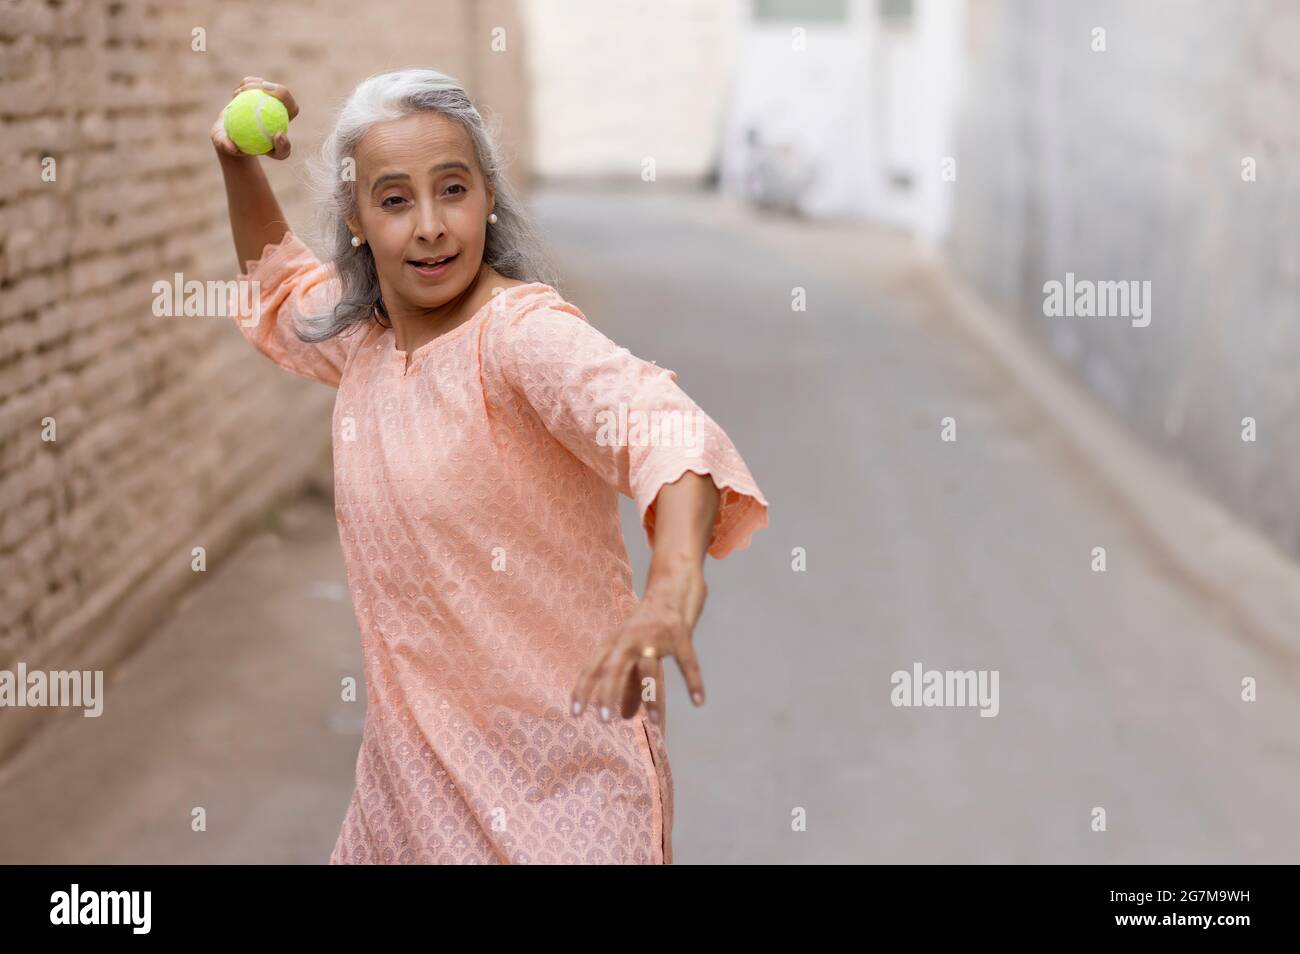 An old woman playing cricket Bowling. Stock Photo